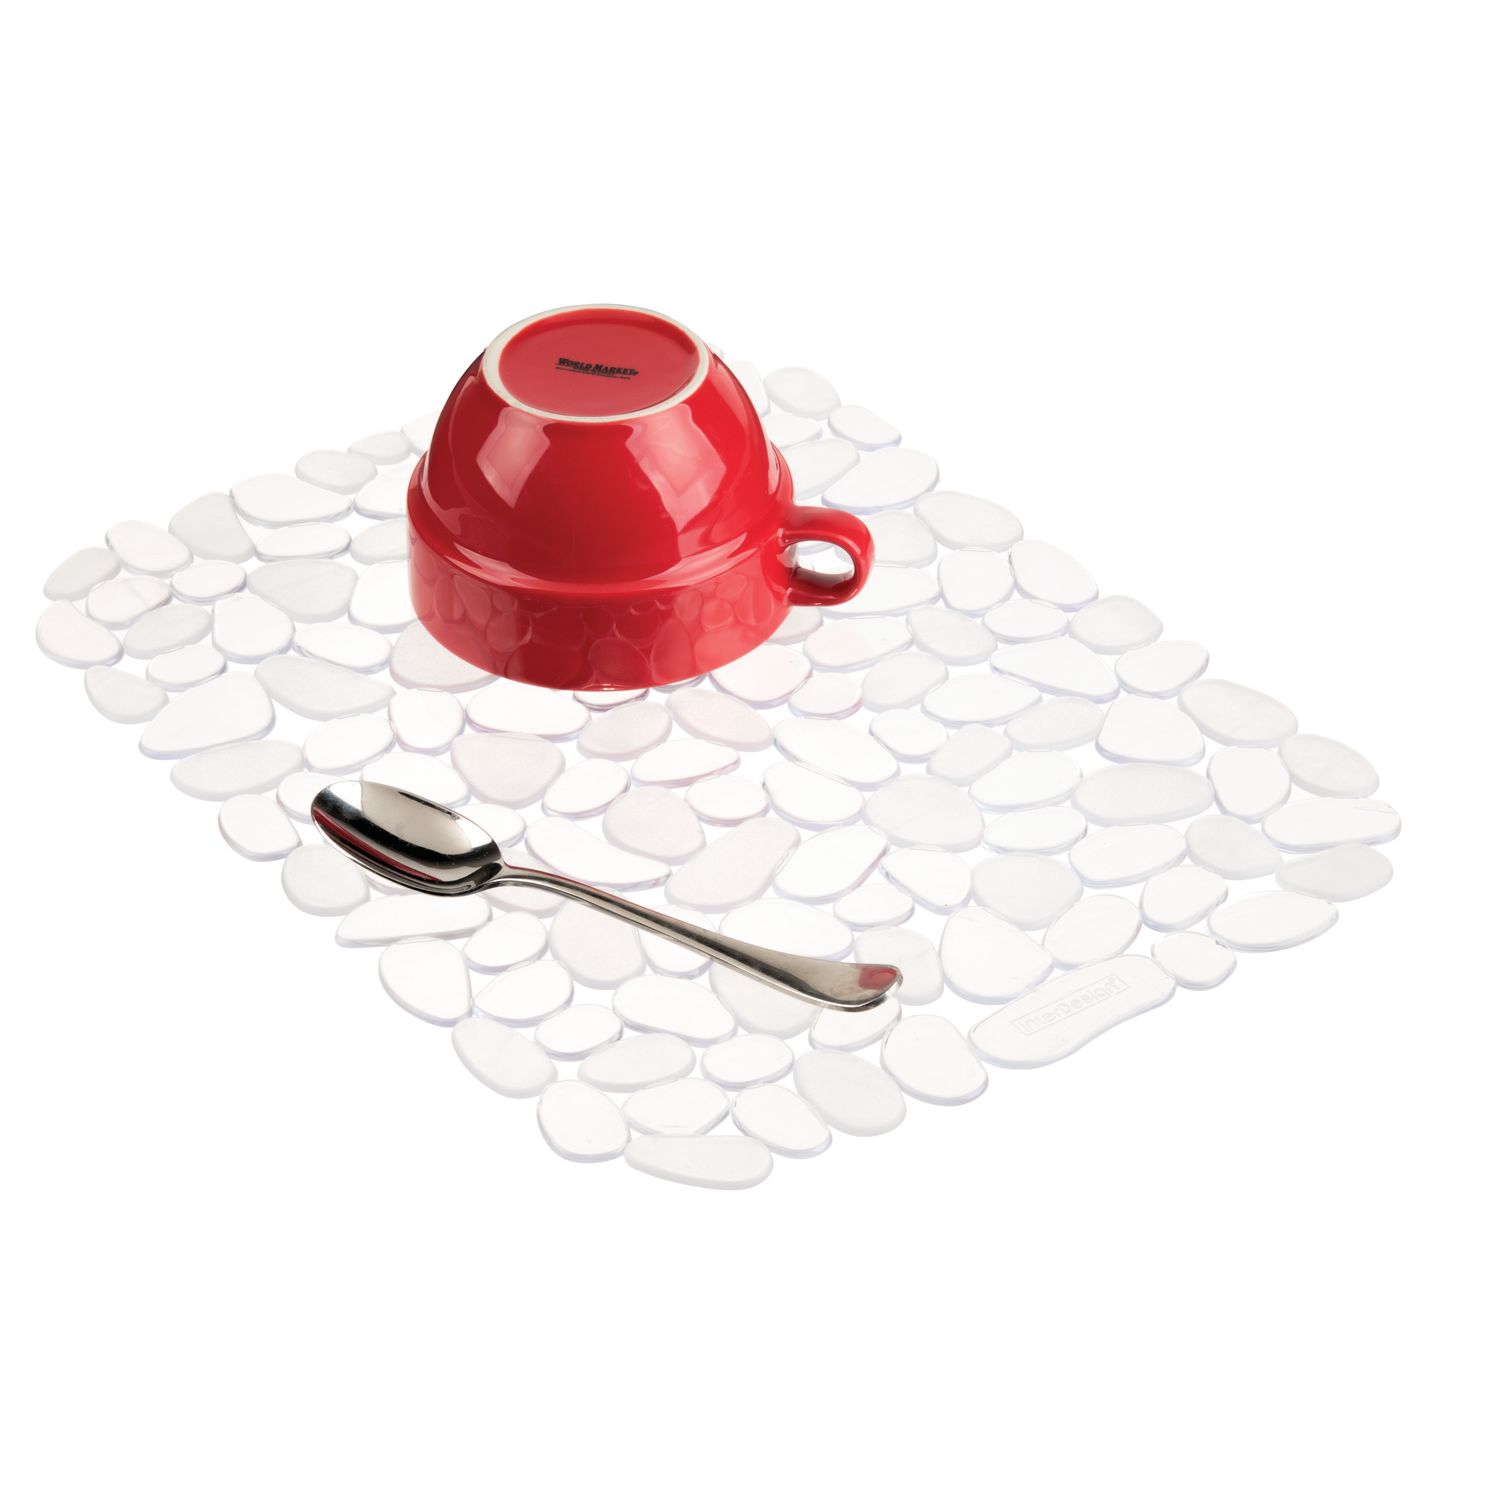 iDesign Pebblz 12" x 15.5" Large Sink Mat, Clear - image 6 of 7